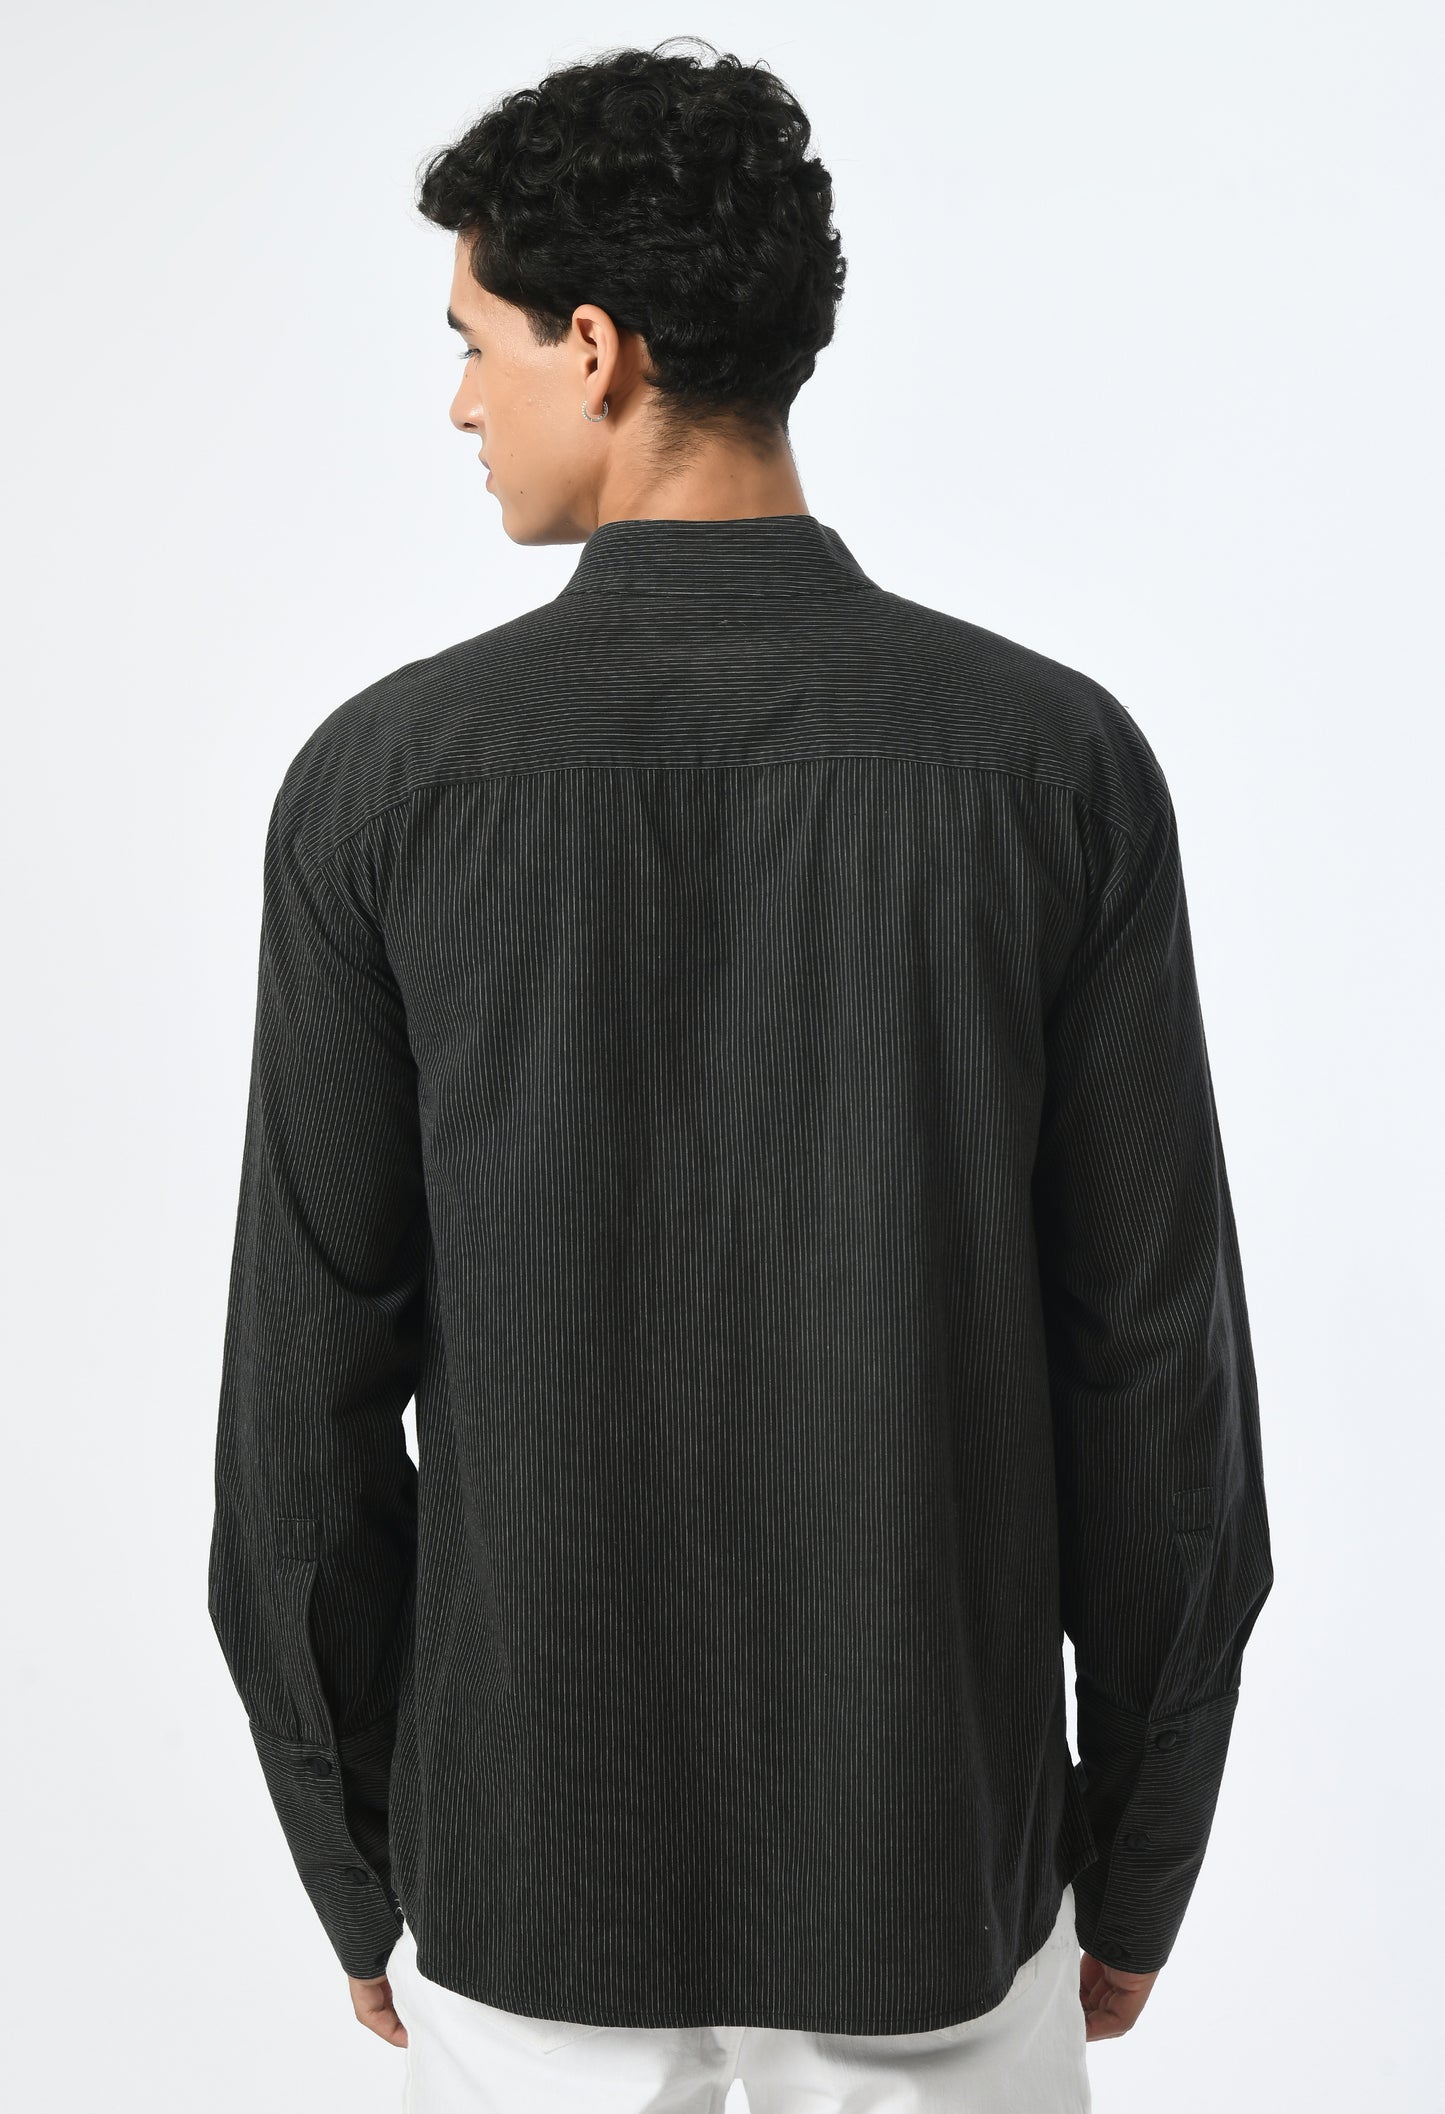 Men's charcoal shirt adorned with white stripes.